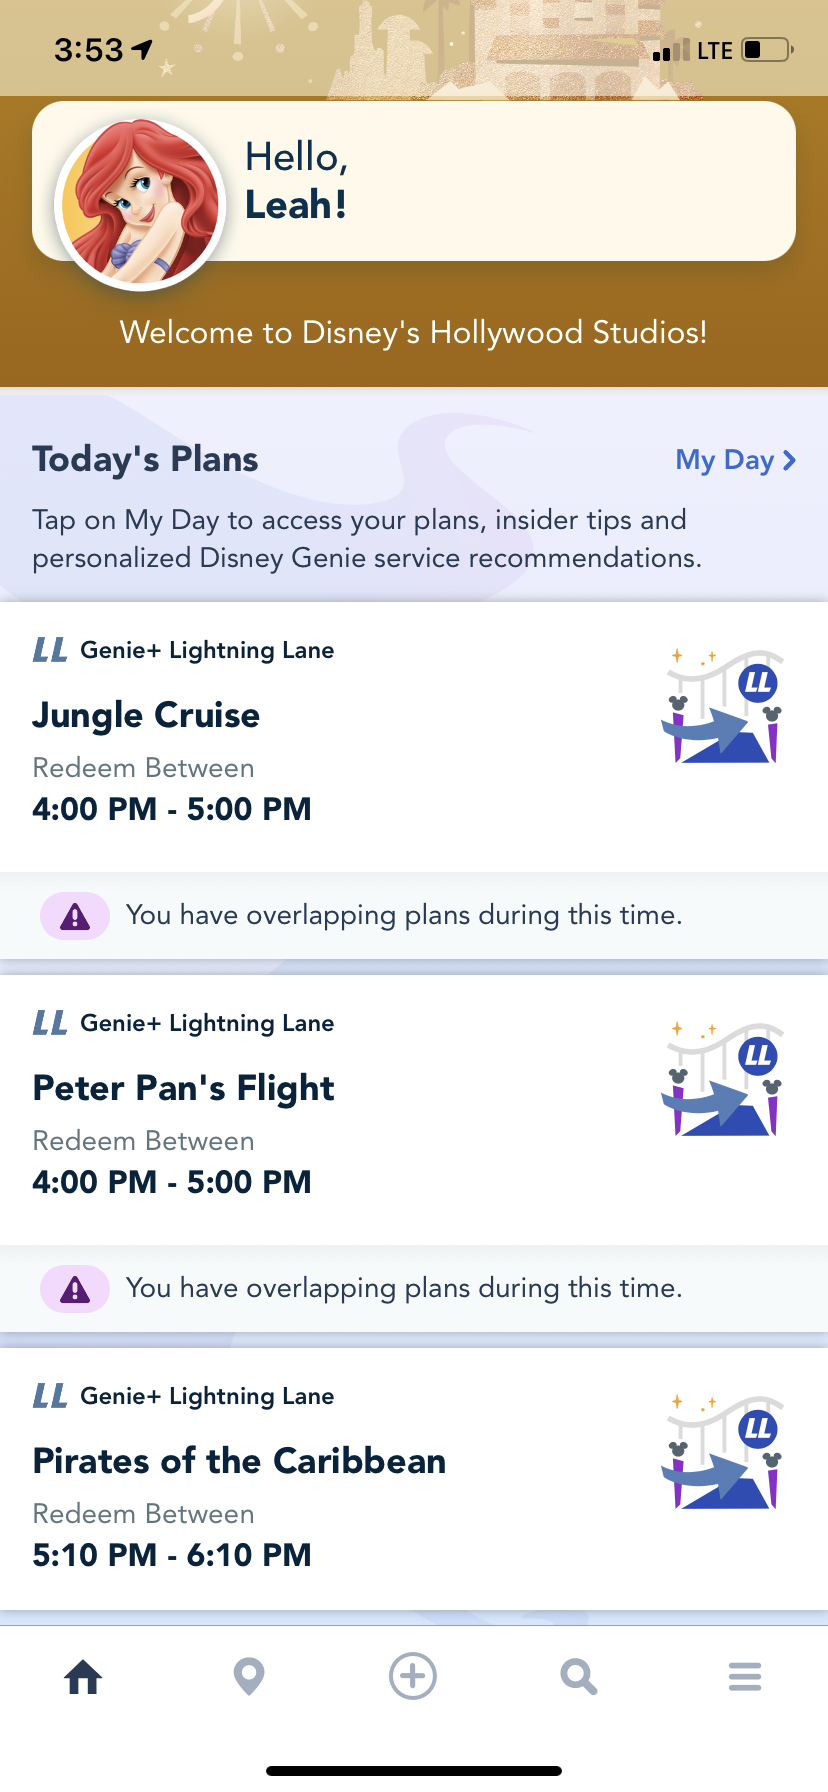 stacking lightning lane reservations in genie+